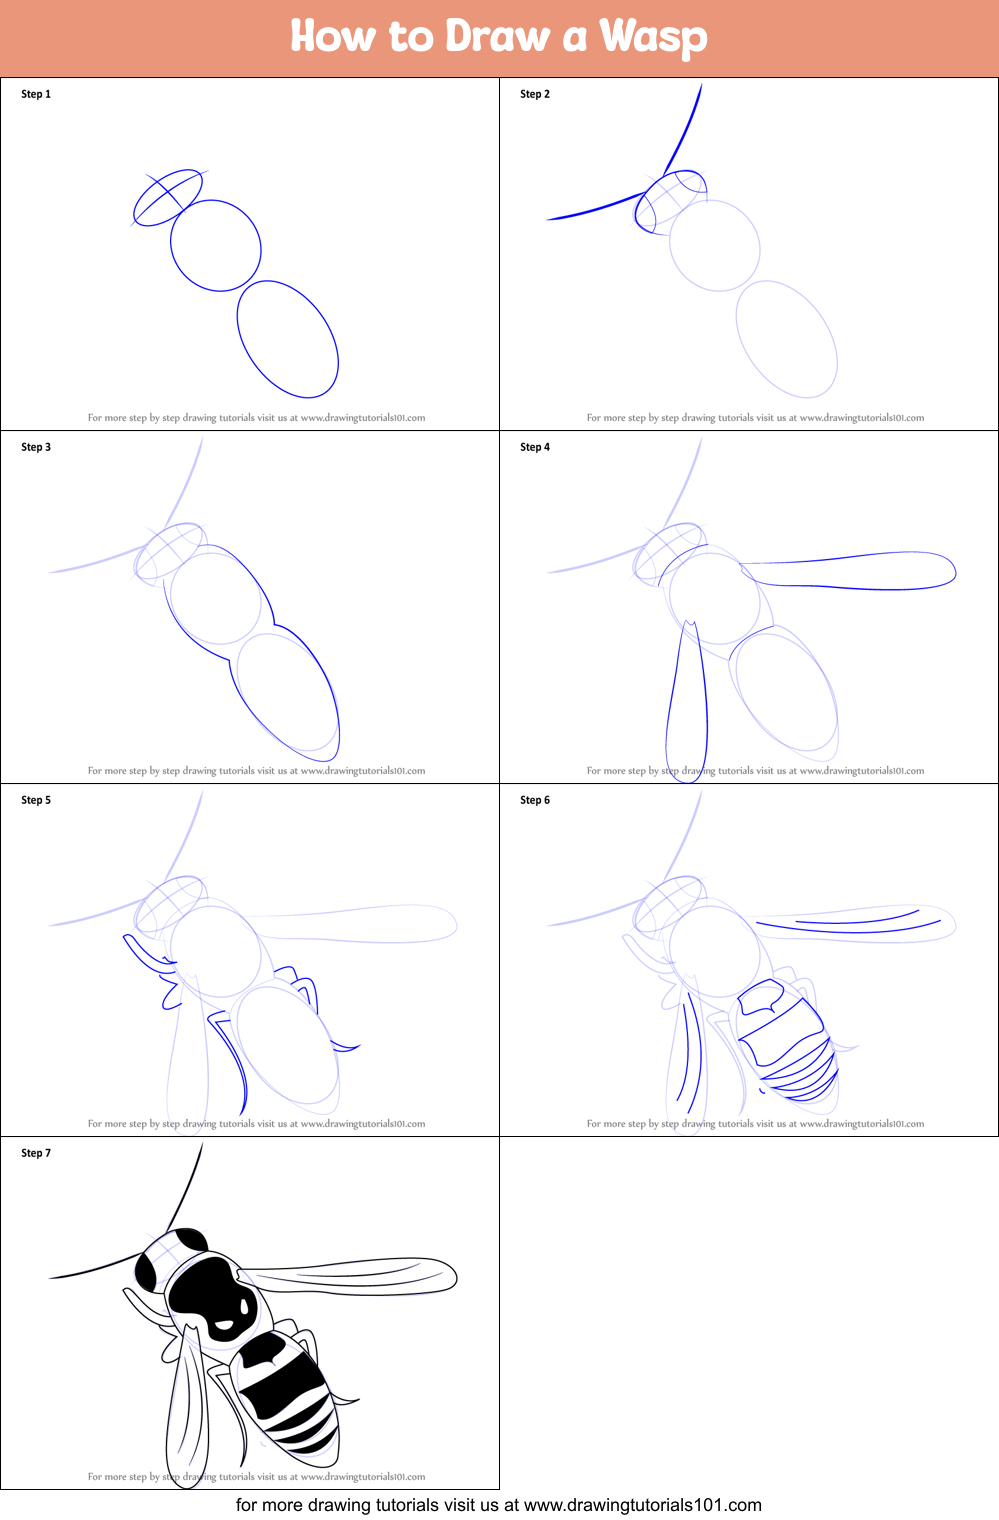 How to Draw a Wasp printable step by step drawing sheet